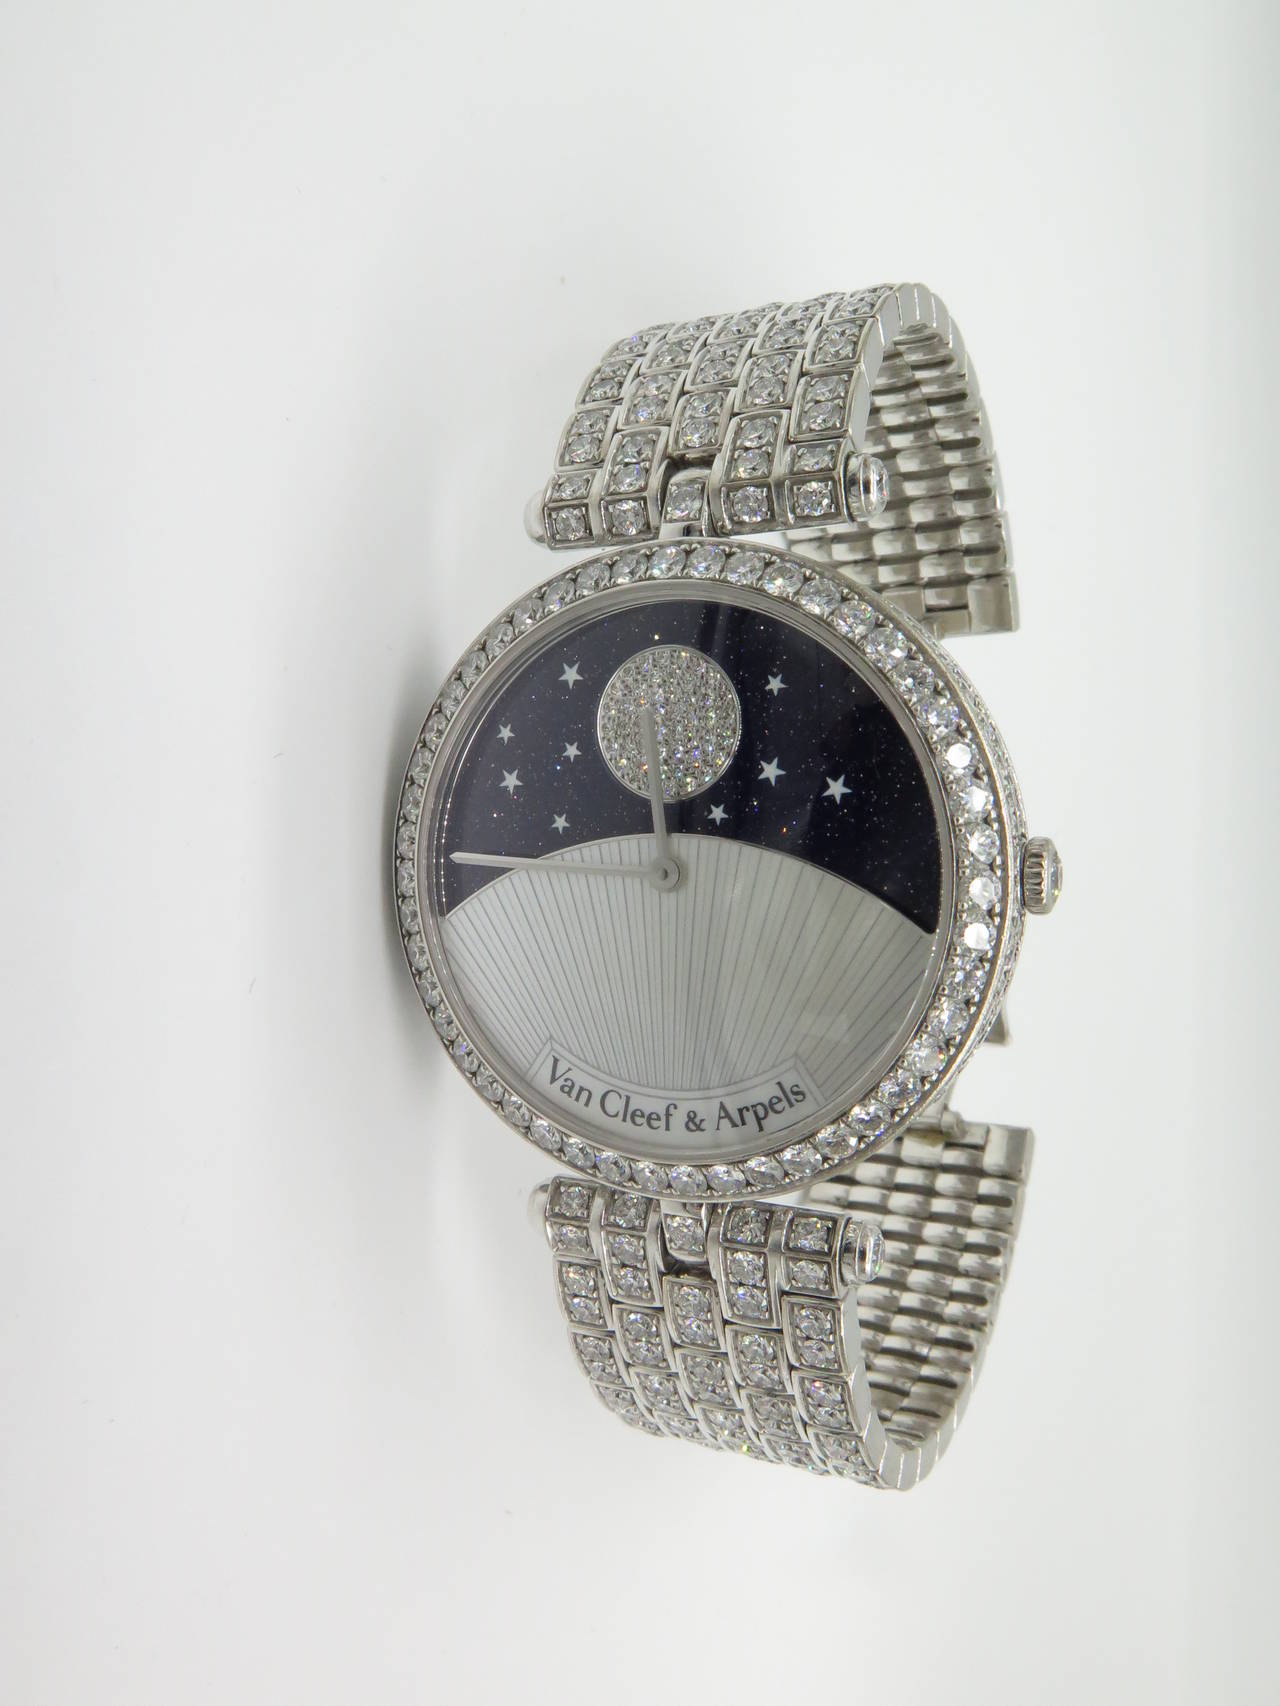 Van Cleef & Arpels Lady's White Gold Day And Night Wristwatch In Excellent Condition For Sale In Atlanta, GA